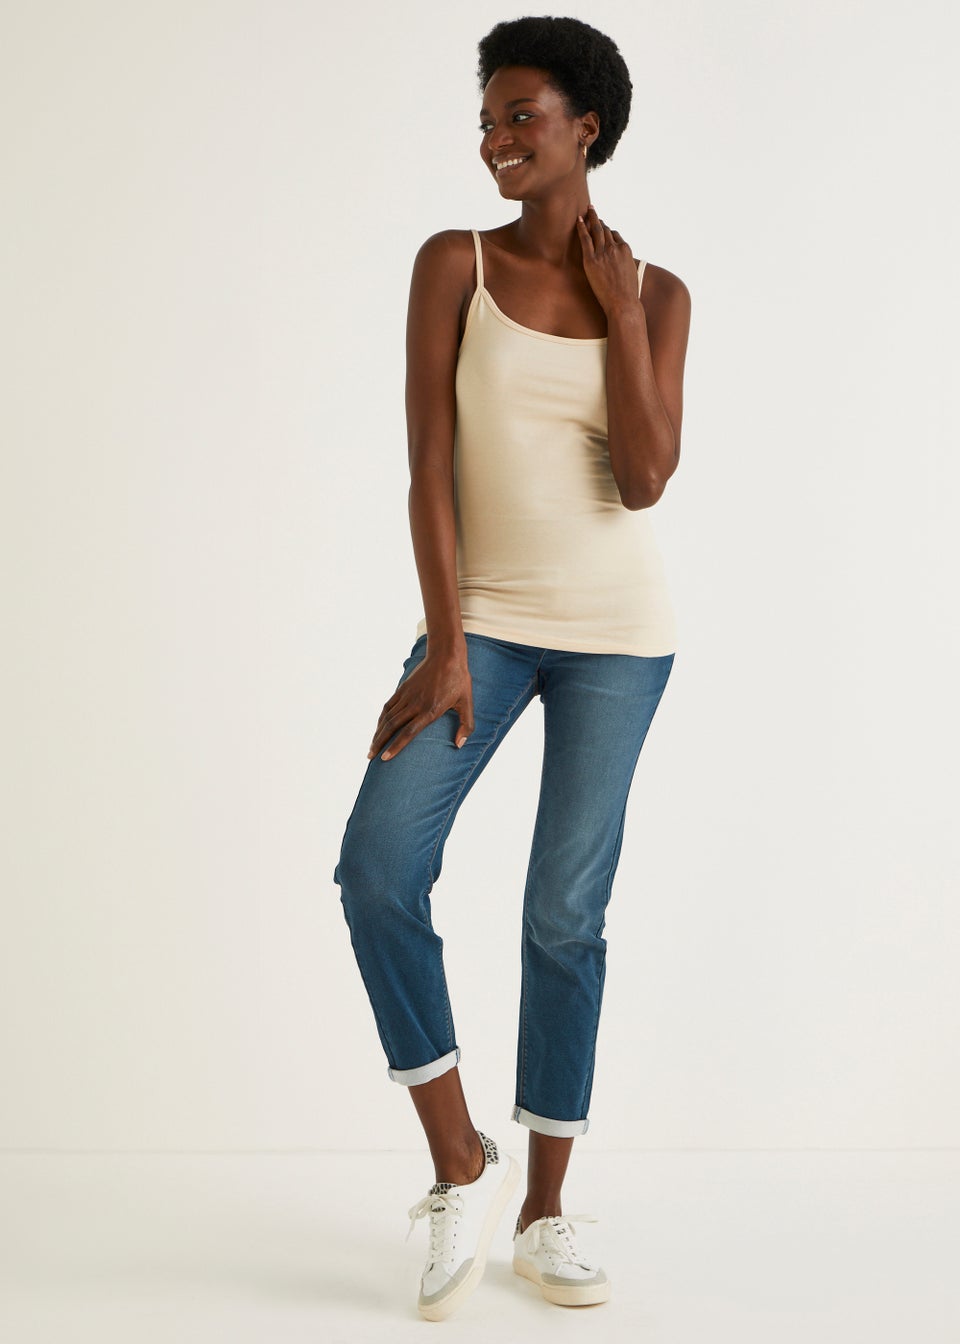 Maternity Jolie Dark Wash Under Bump Relaxed Skinny Jeans